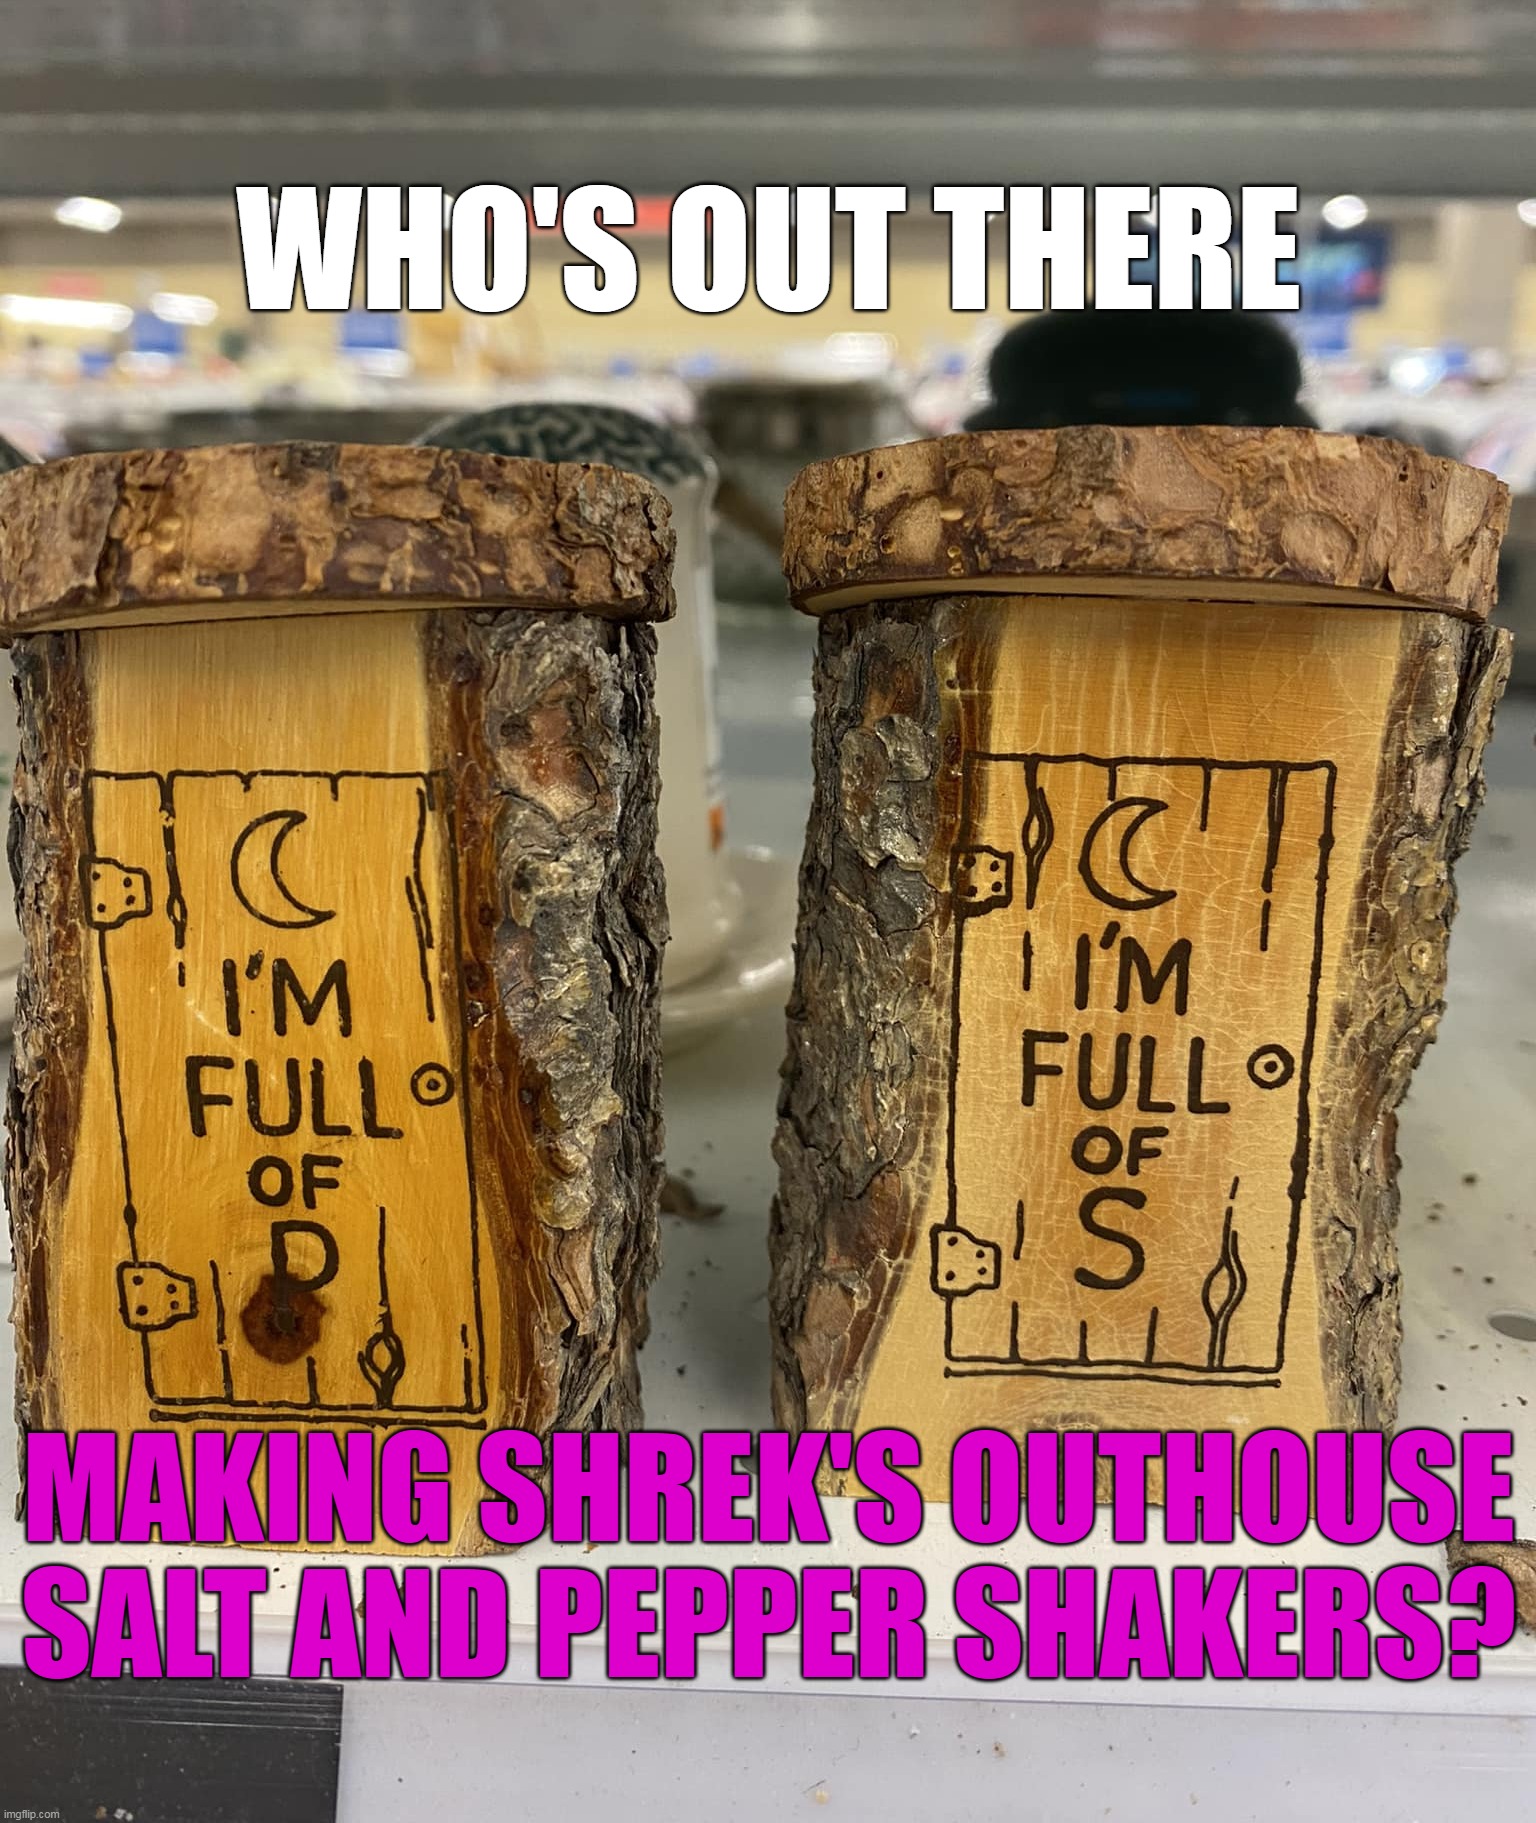 WHO'S OUT THERE; MAKING SHREK'S OUTHOUSE SALT AND PEPPER SHAKERS? | image tagged in meme,memes,humor,funny | made w/ Imgflip meme maker